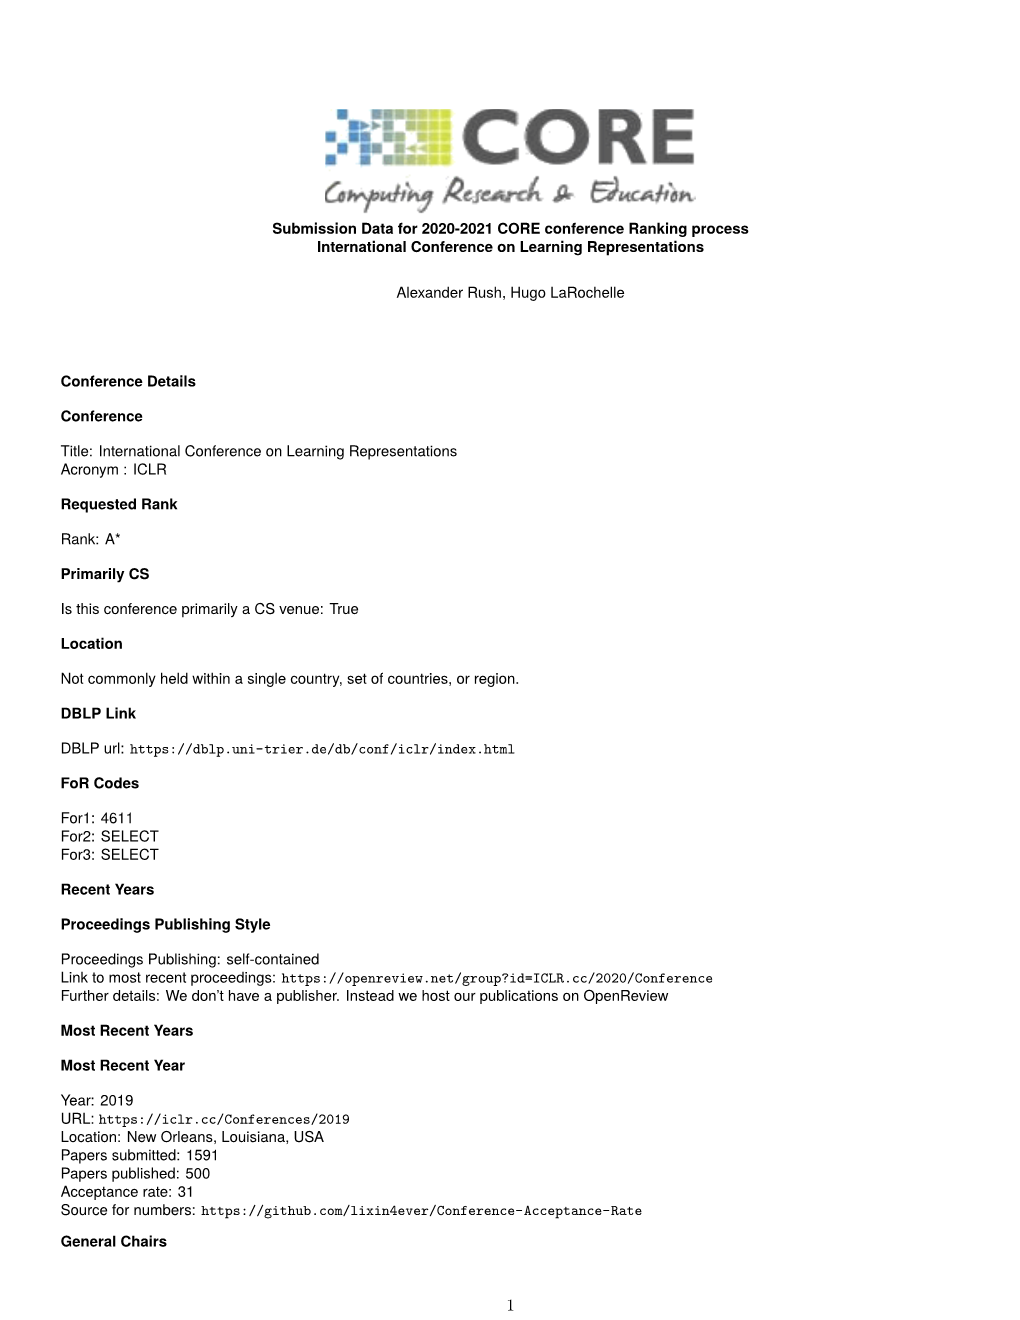 Submission Data for 2020-2021 CORE Conference Ranking Process International Conference on Learning Representations